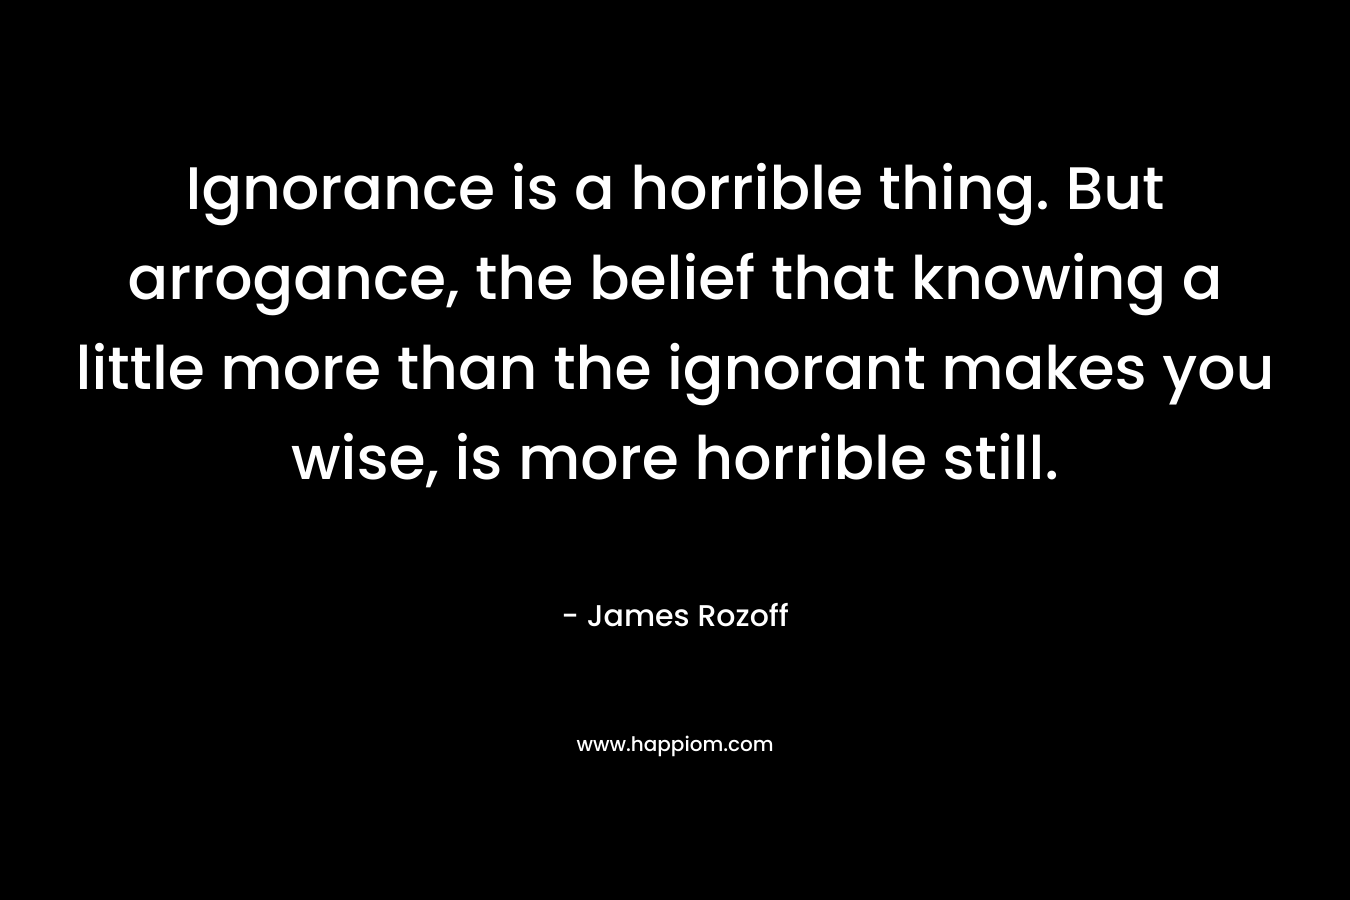 Ignorance is a horrible thing. But arrogance, the belief that knowing a little more than the ignorant makes you wise, is more horrible still.